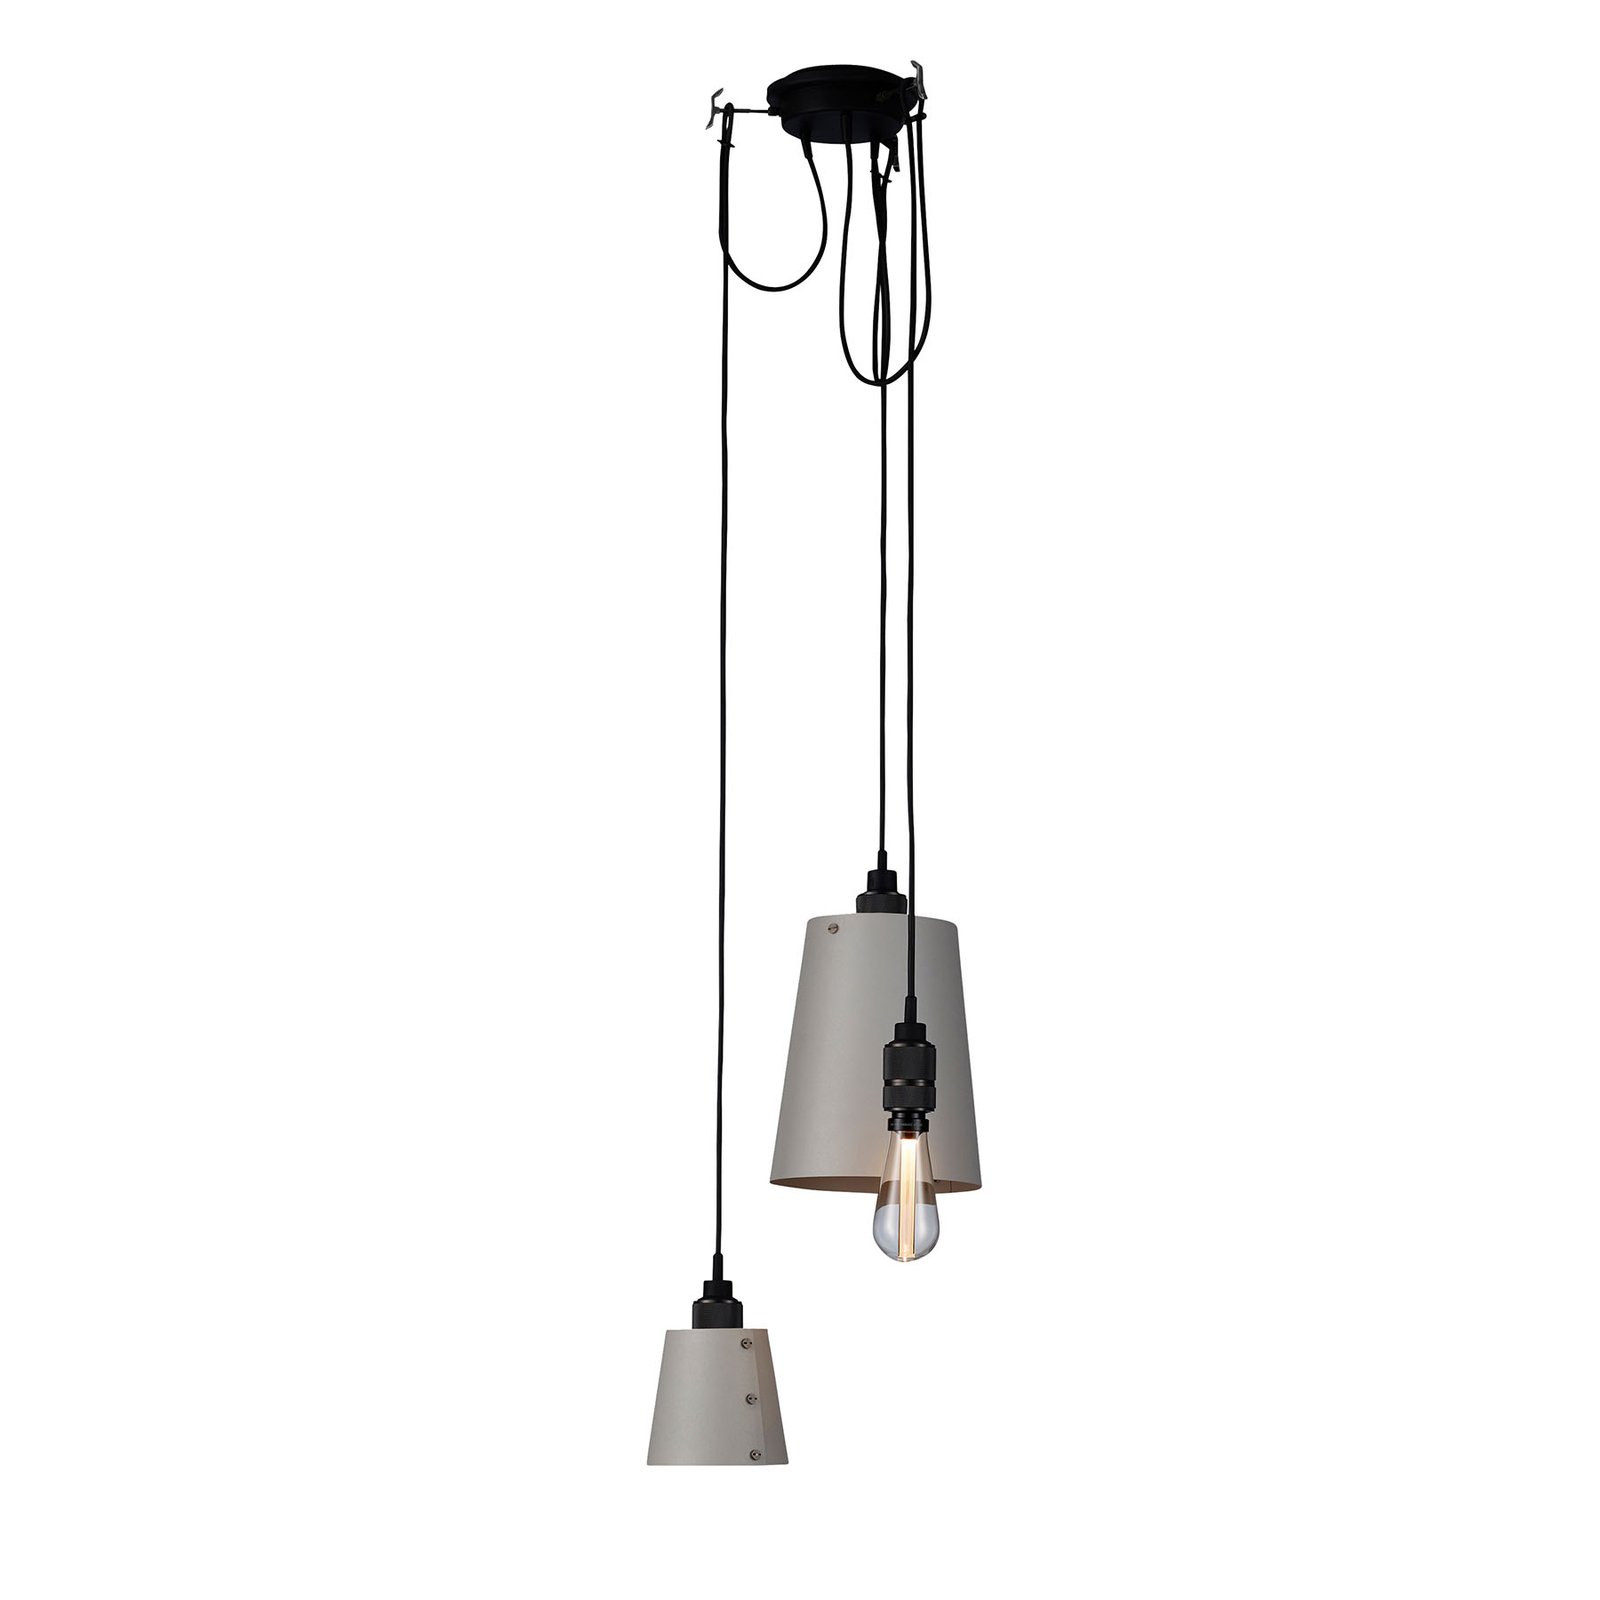 Buster + Punch Hooked 3.0 mix gris/bronce